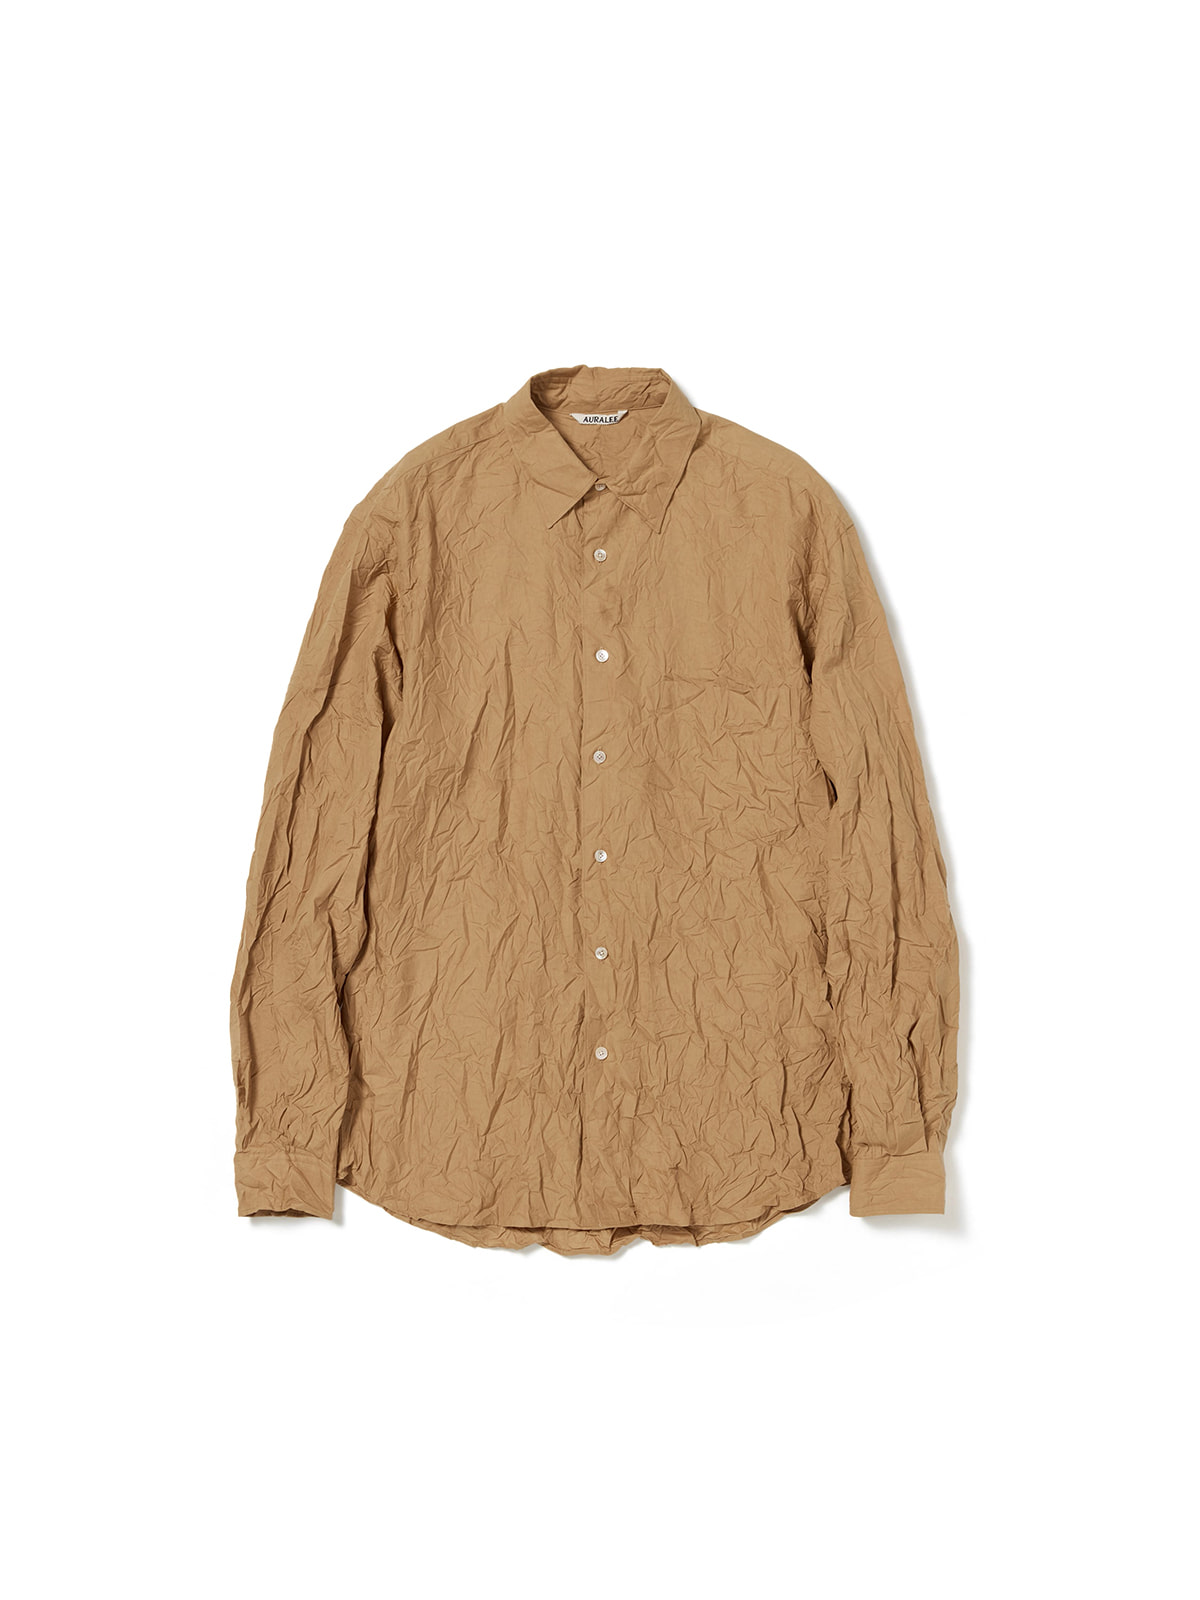 WRINKLED WASHED FINX TWILL SHIRT (BROWN)